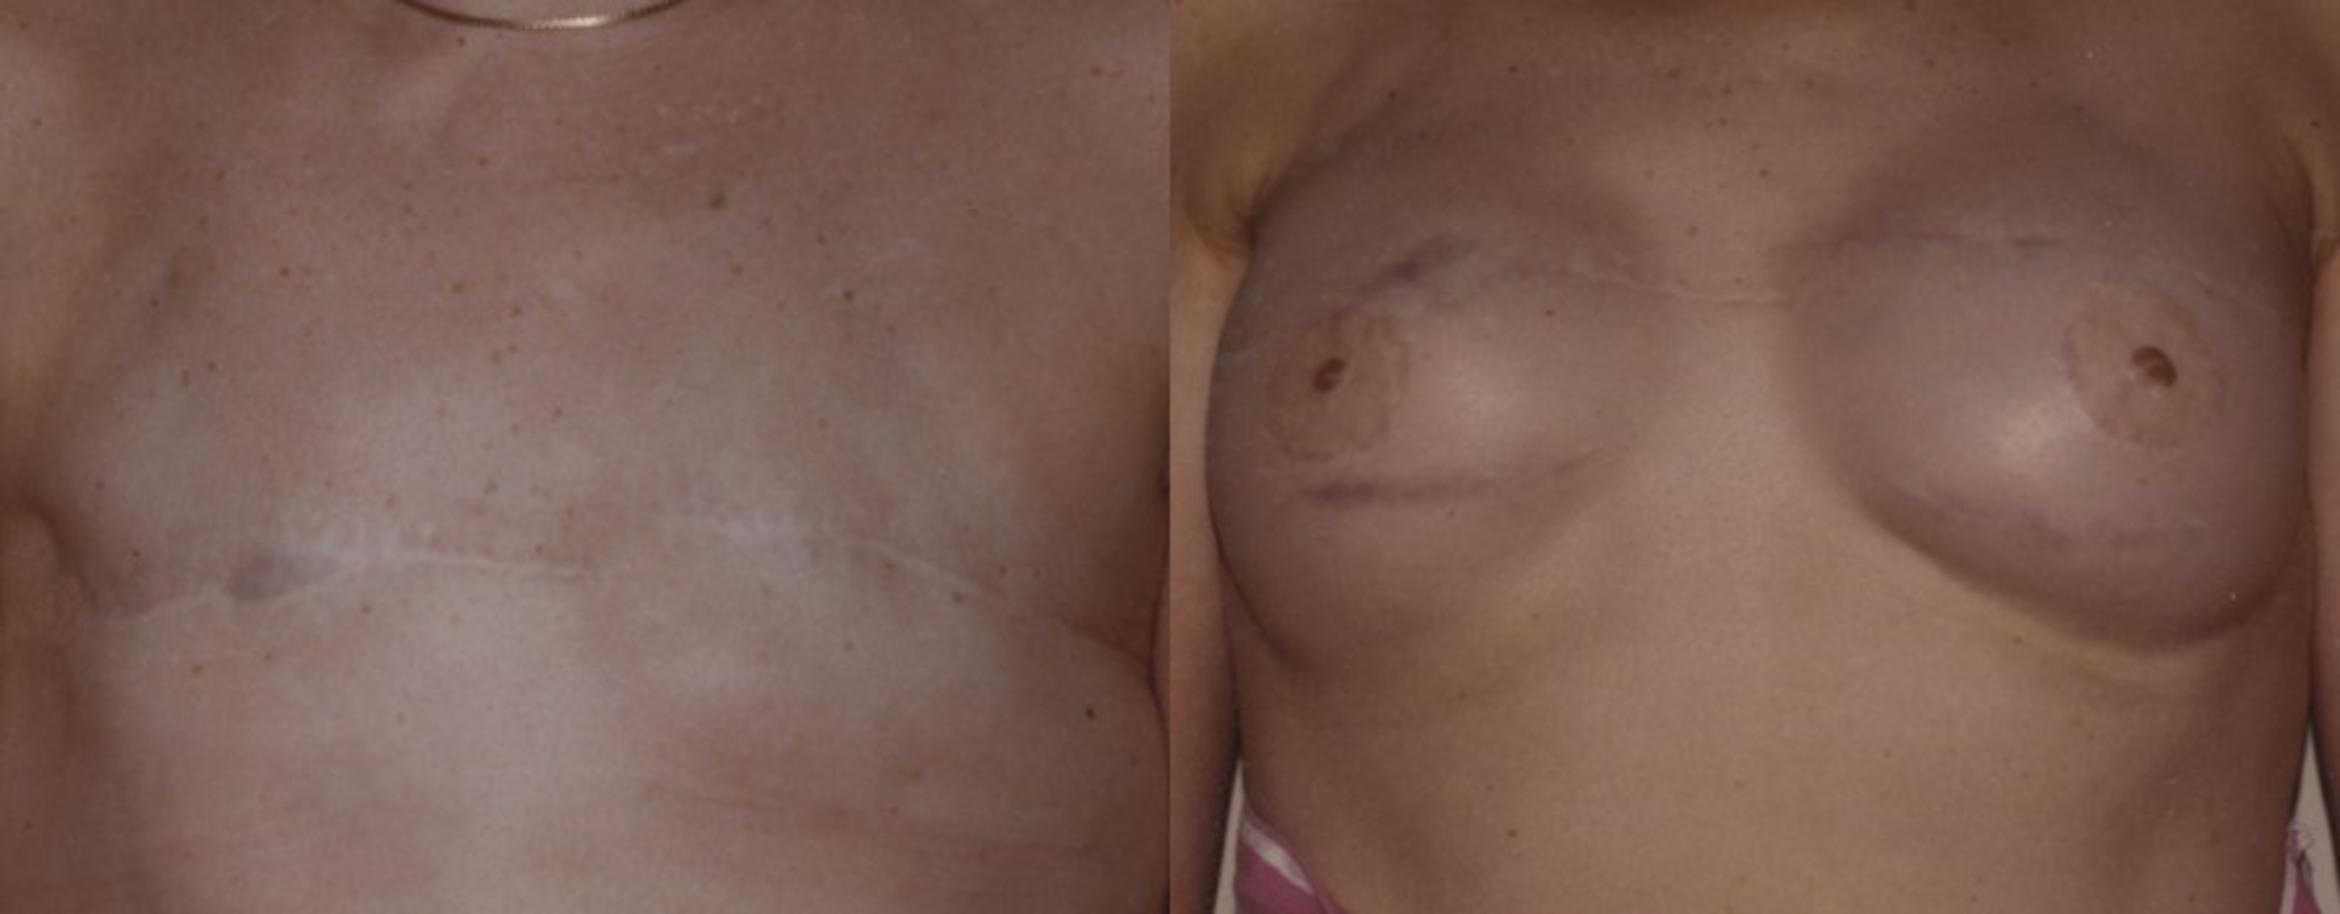 Breast Reconstruction Before & After Photo | New Jersey & Pennsylvania,  | The Derm Group